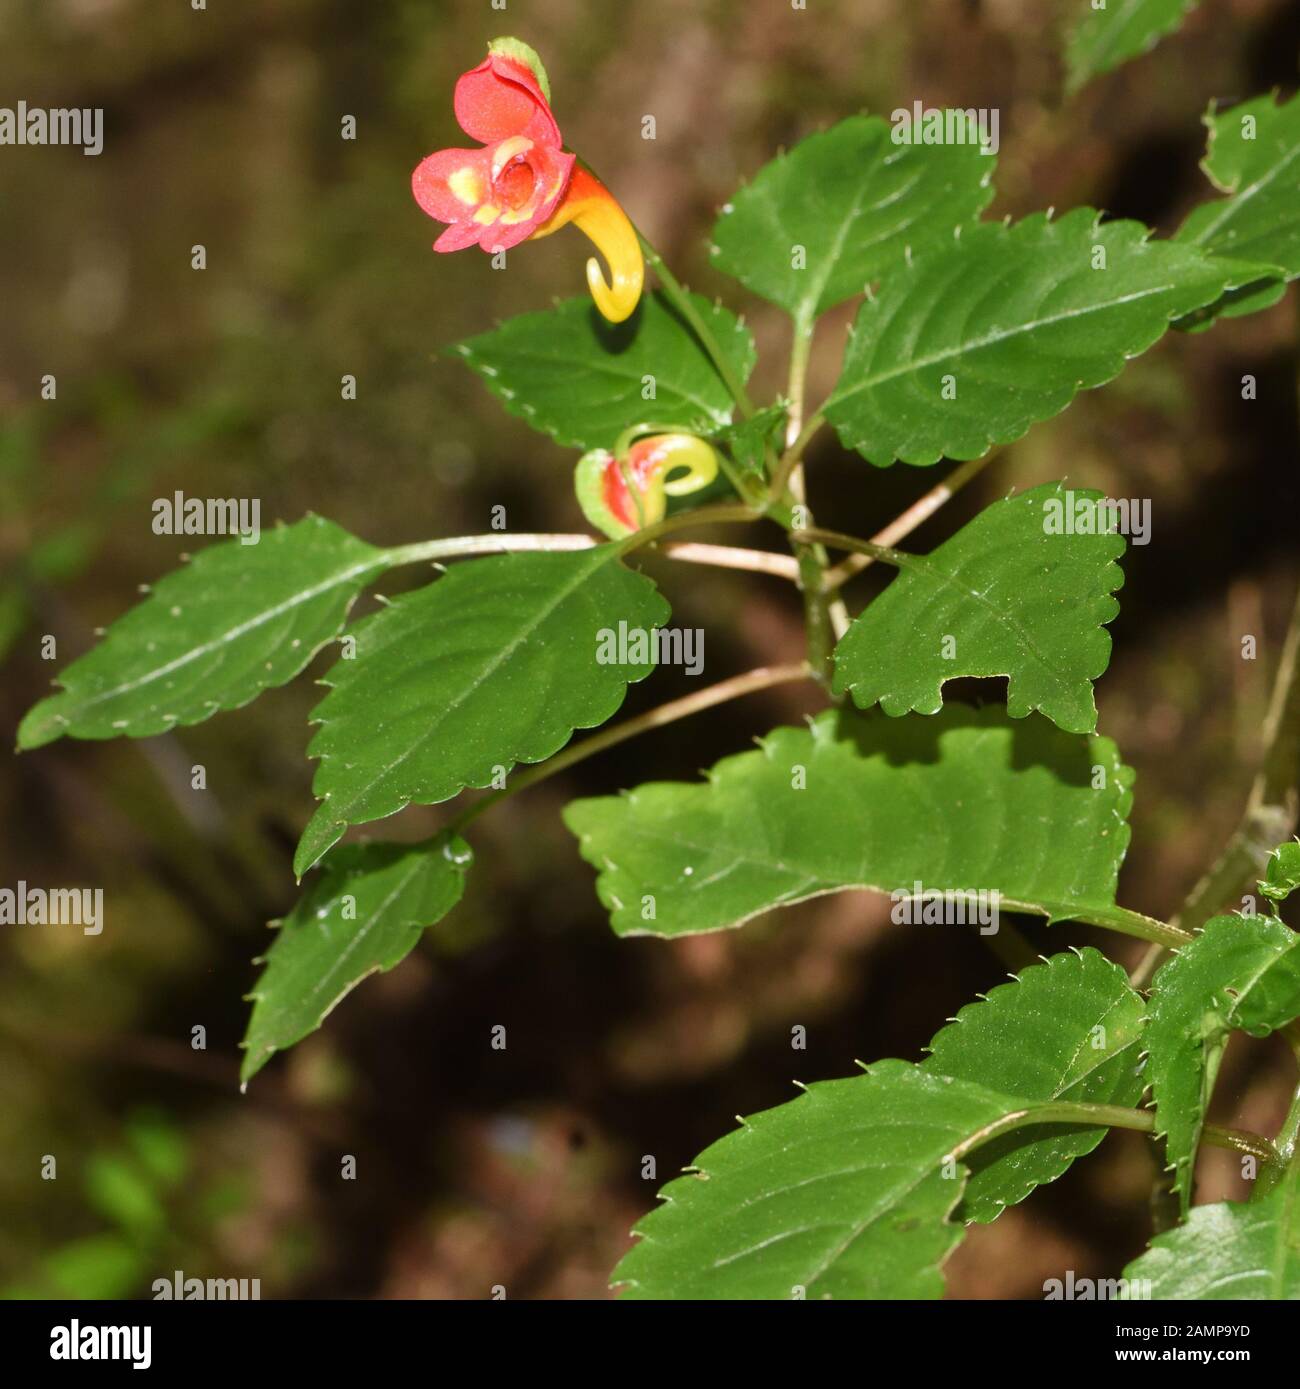 Flower of Kilimanjaro Impatiens (Impatiens kilimanjari) growing on the forest floor on the lower slopes of Kilimanjaro. This plant is endemic to the m Stock Photo